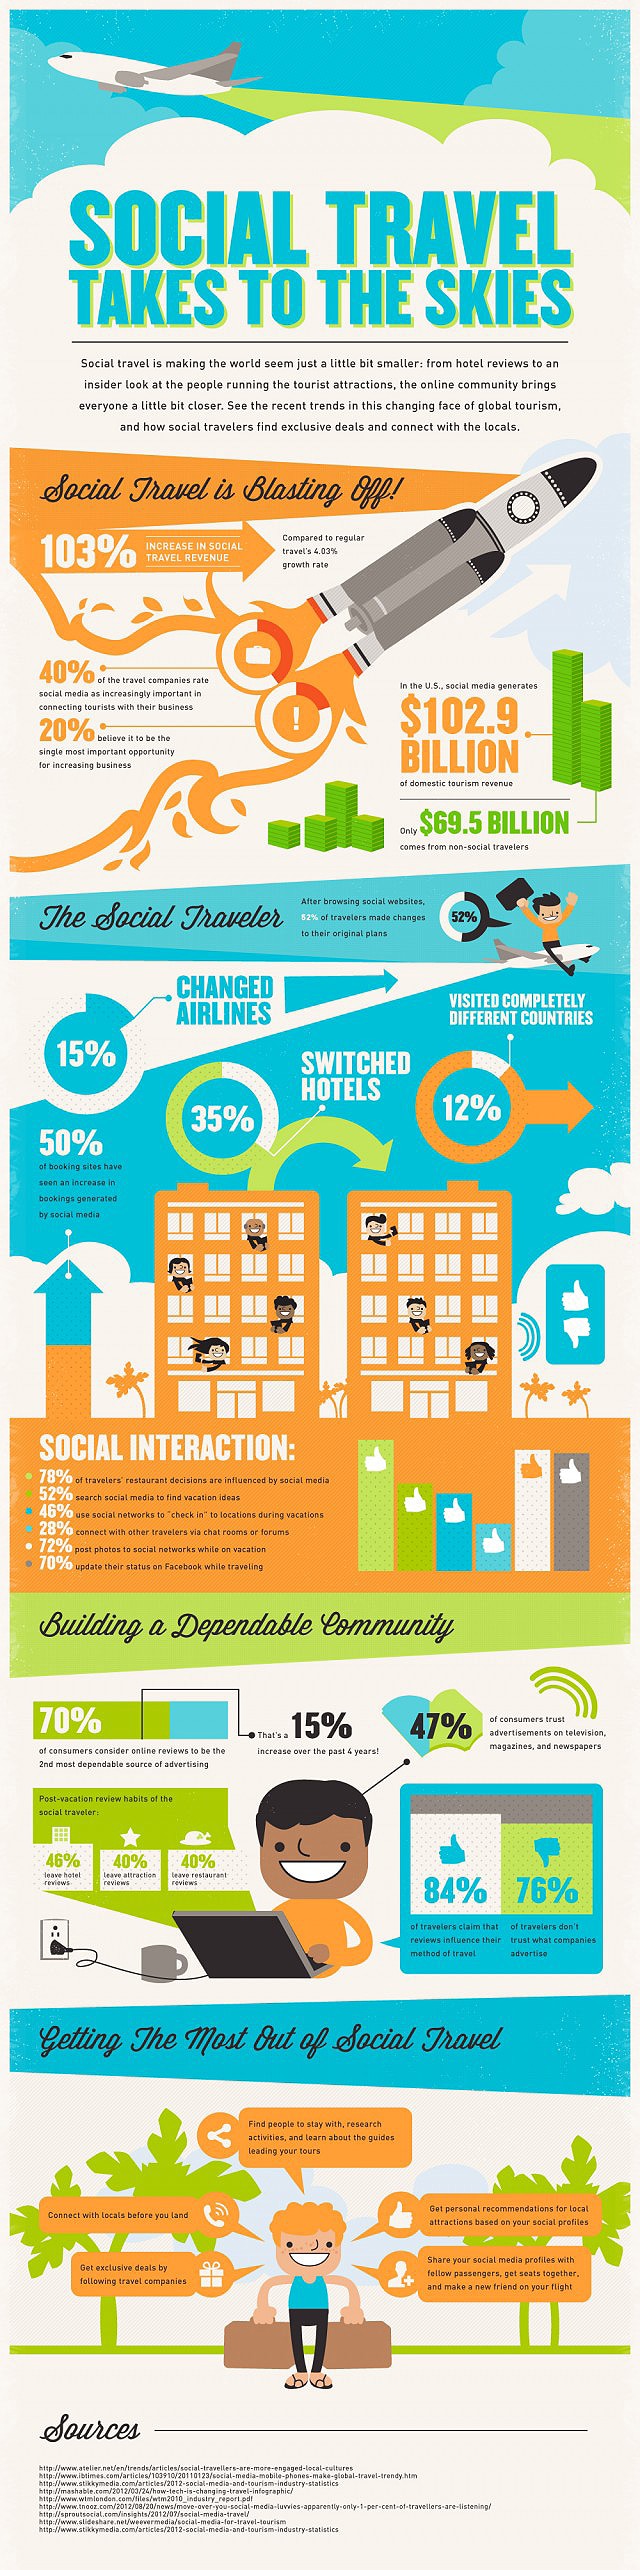 How Social Media Affects Your Travel Plans [Infographic]